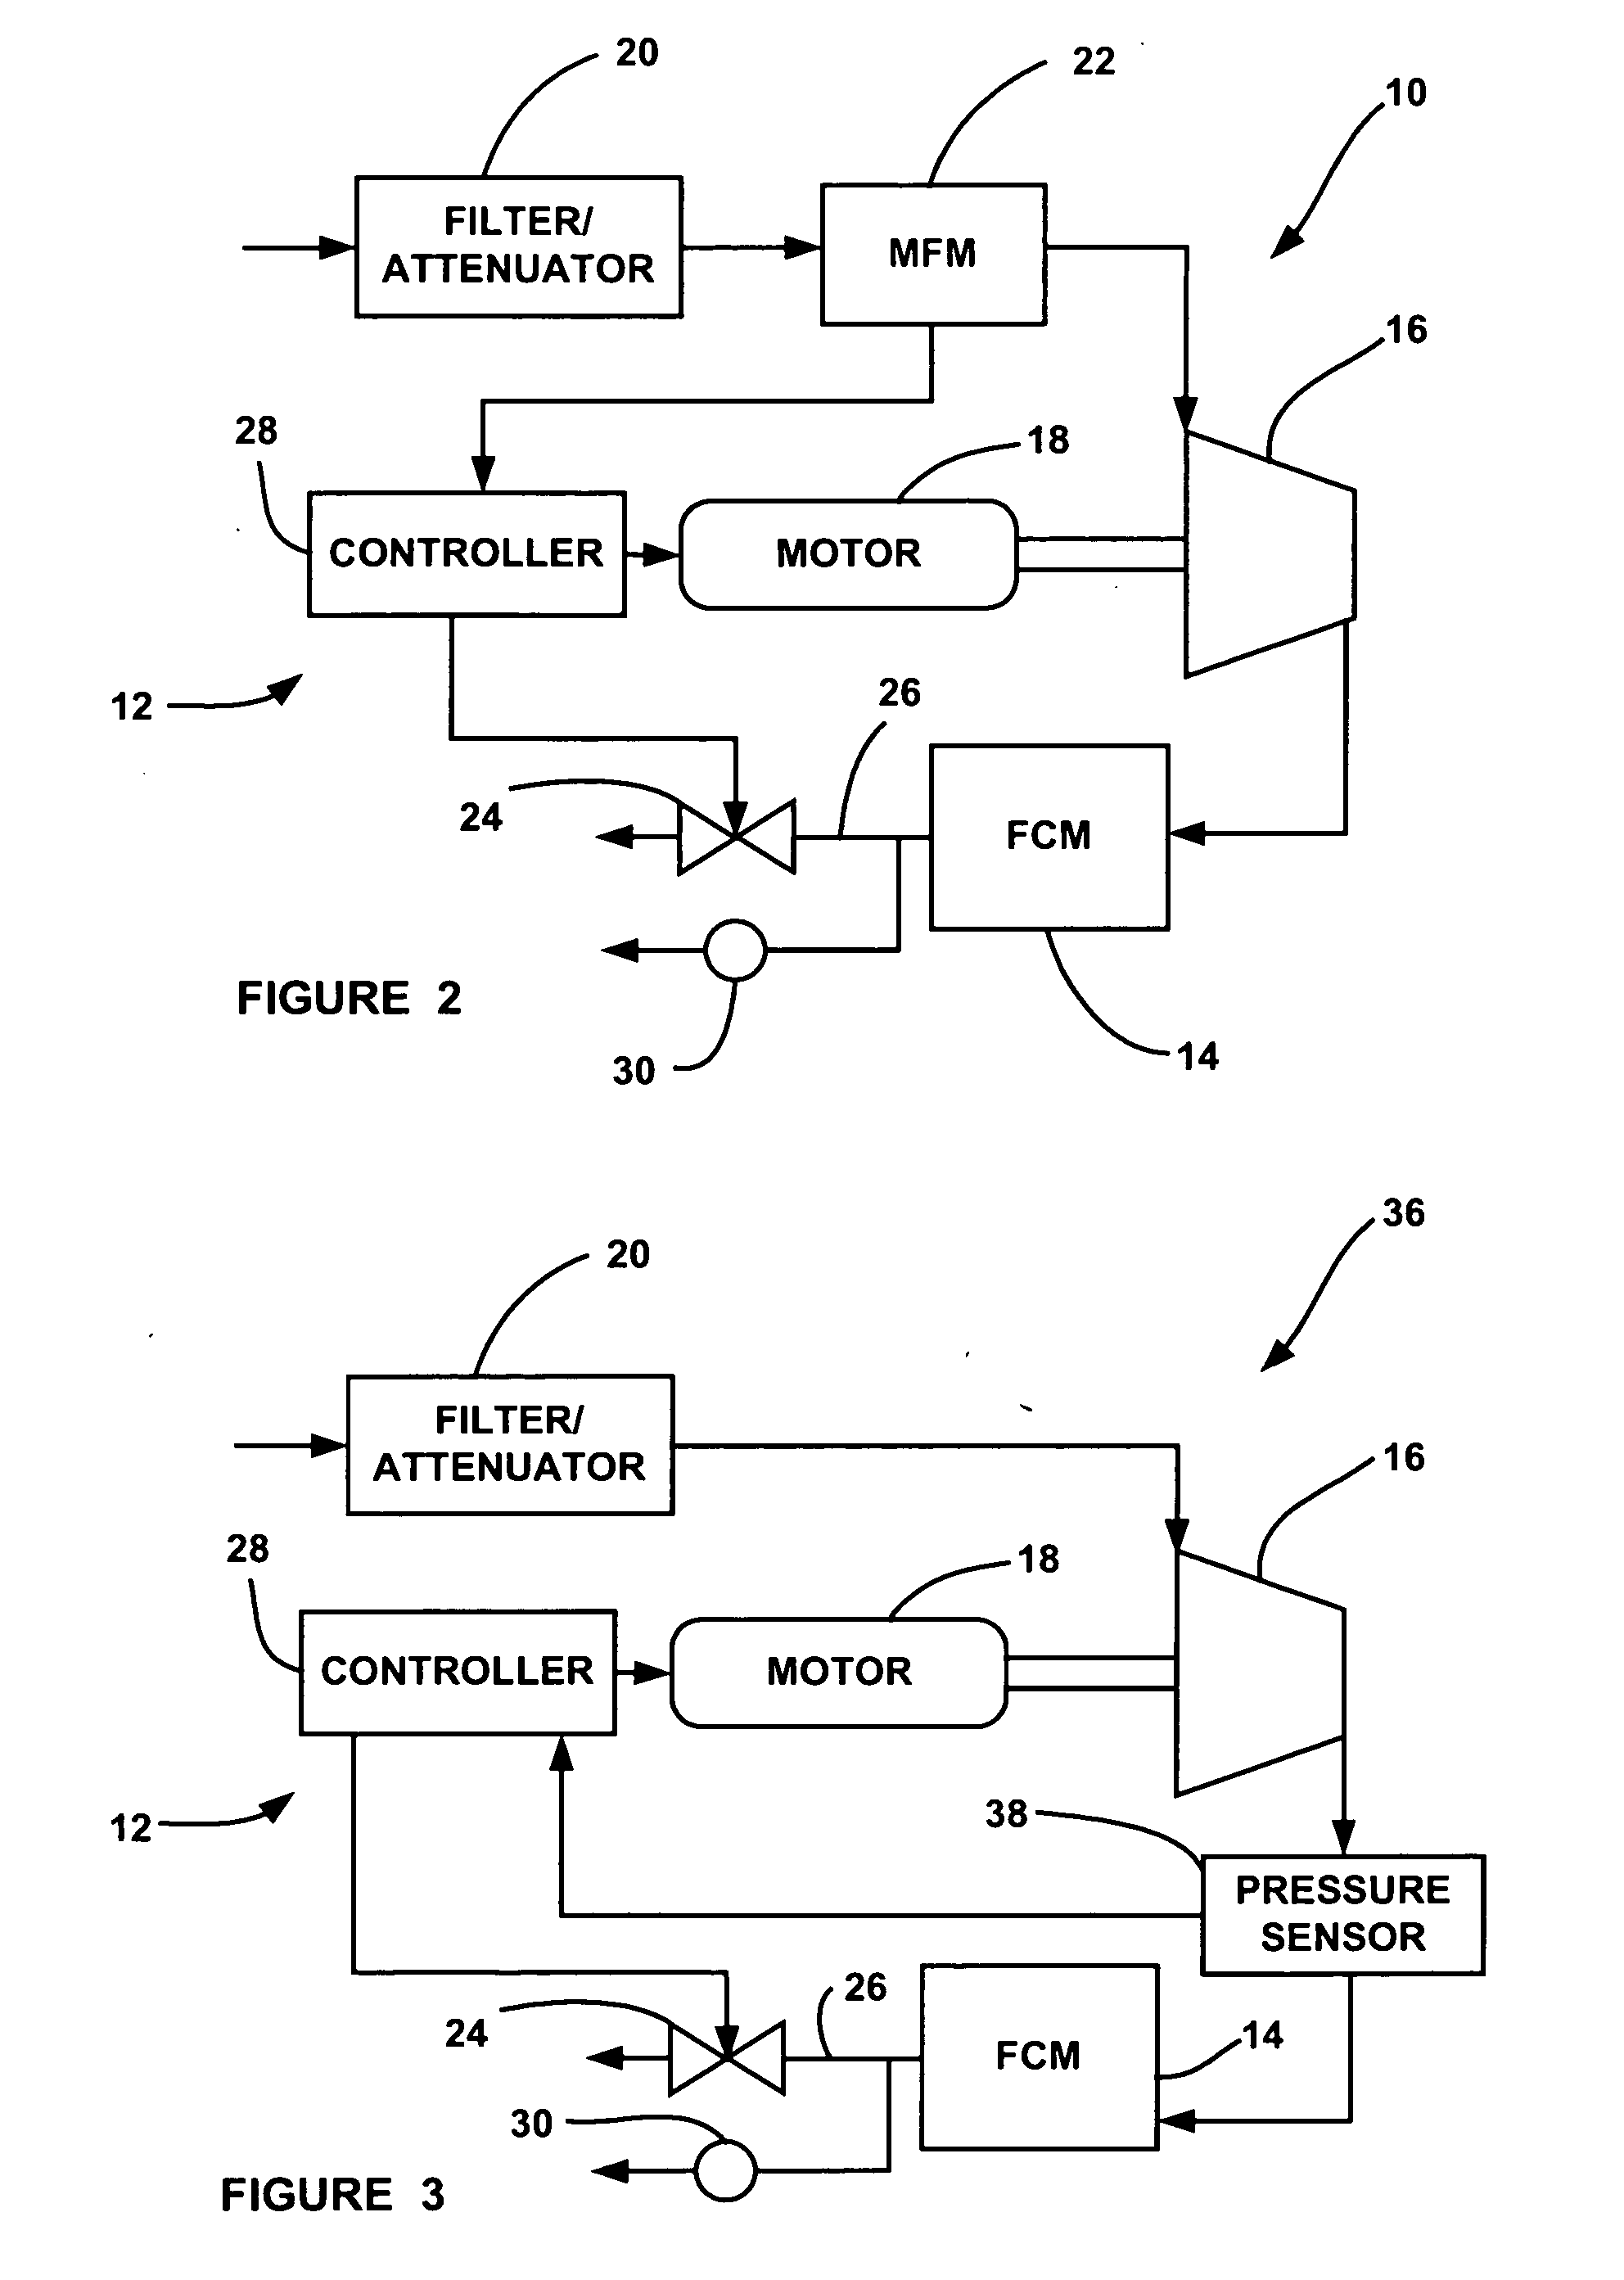 Virtual compressor operational parameter measurement and surge detection in a fuel cell system